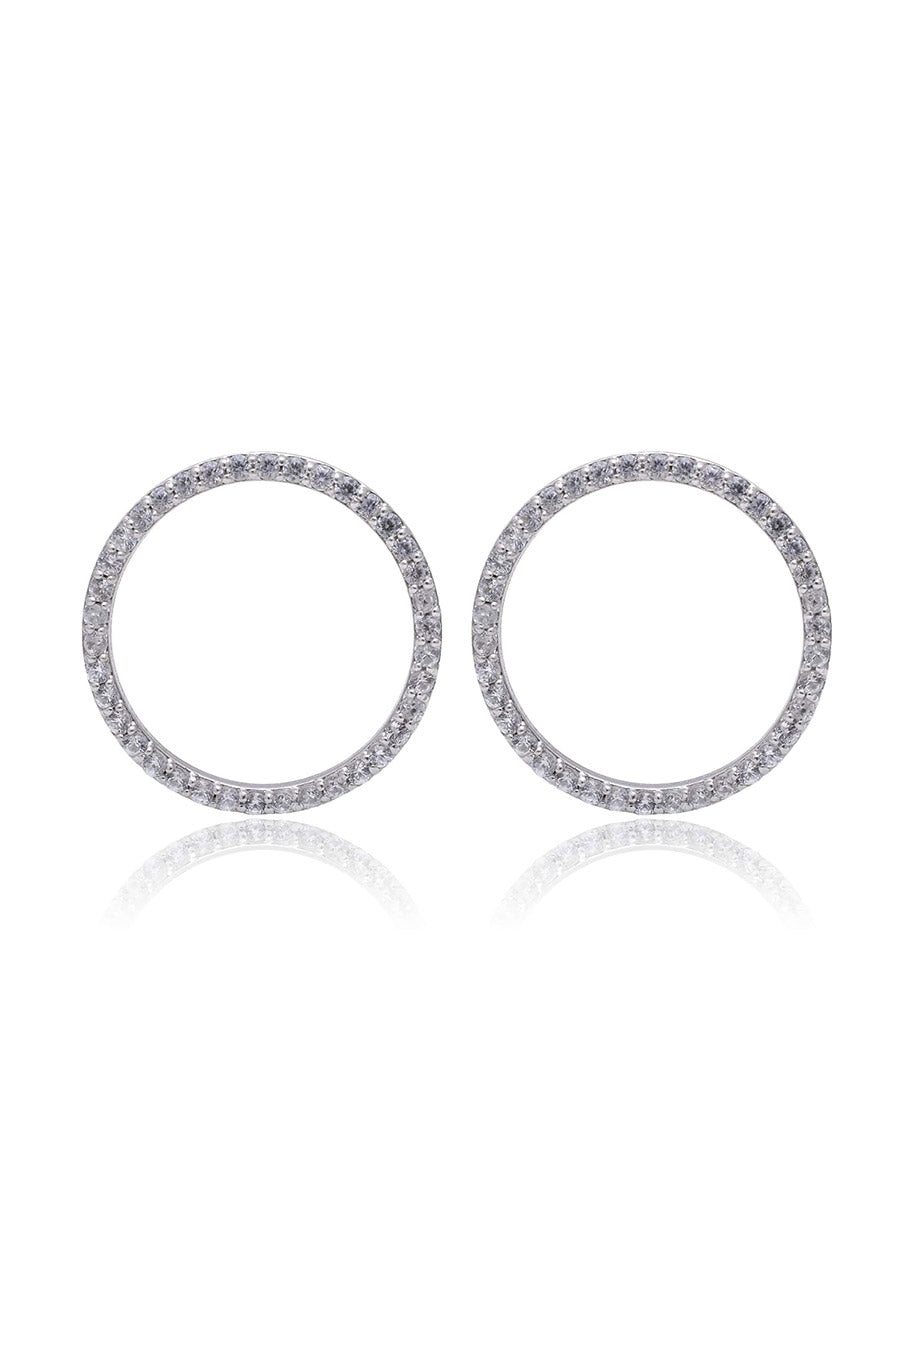 Circle of Life Silver Earrings in 925 Silver